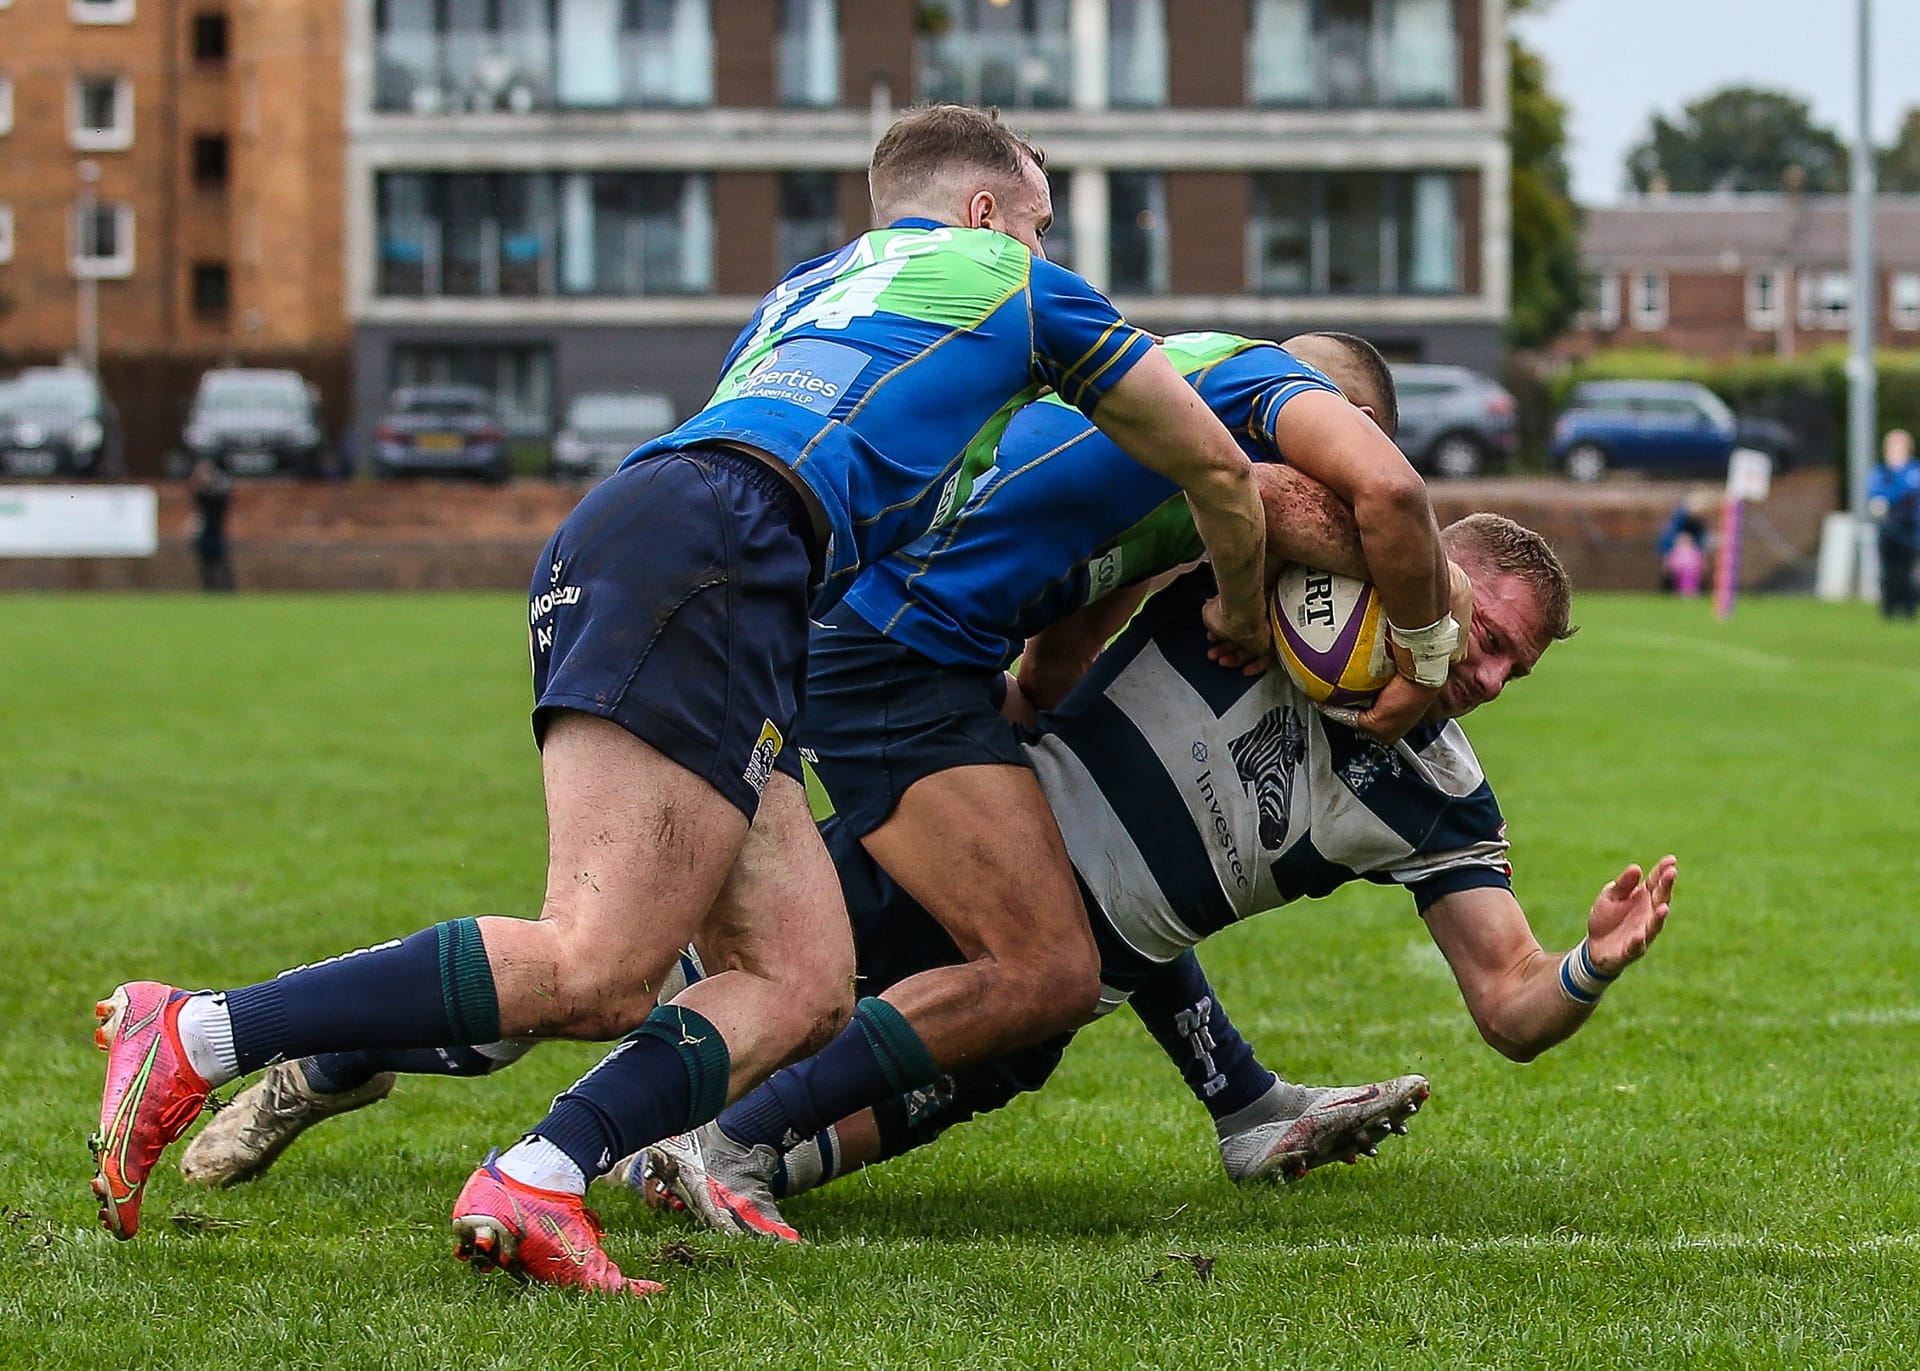 Boroughmuirs Kaleem Barreto and Callum Ramm tackle Heriots Captain Iain Wilson just short of the try line .FOSROC Super 6 match between Heriot's Rugby and Boroughmuir Bears at Goldenacre, Edinburgh on 09/10/2021. 

(Photo: 39 Design Photography)